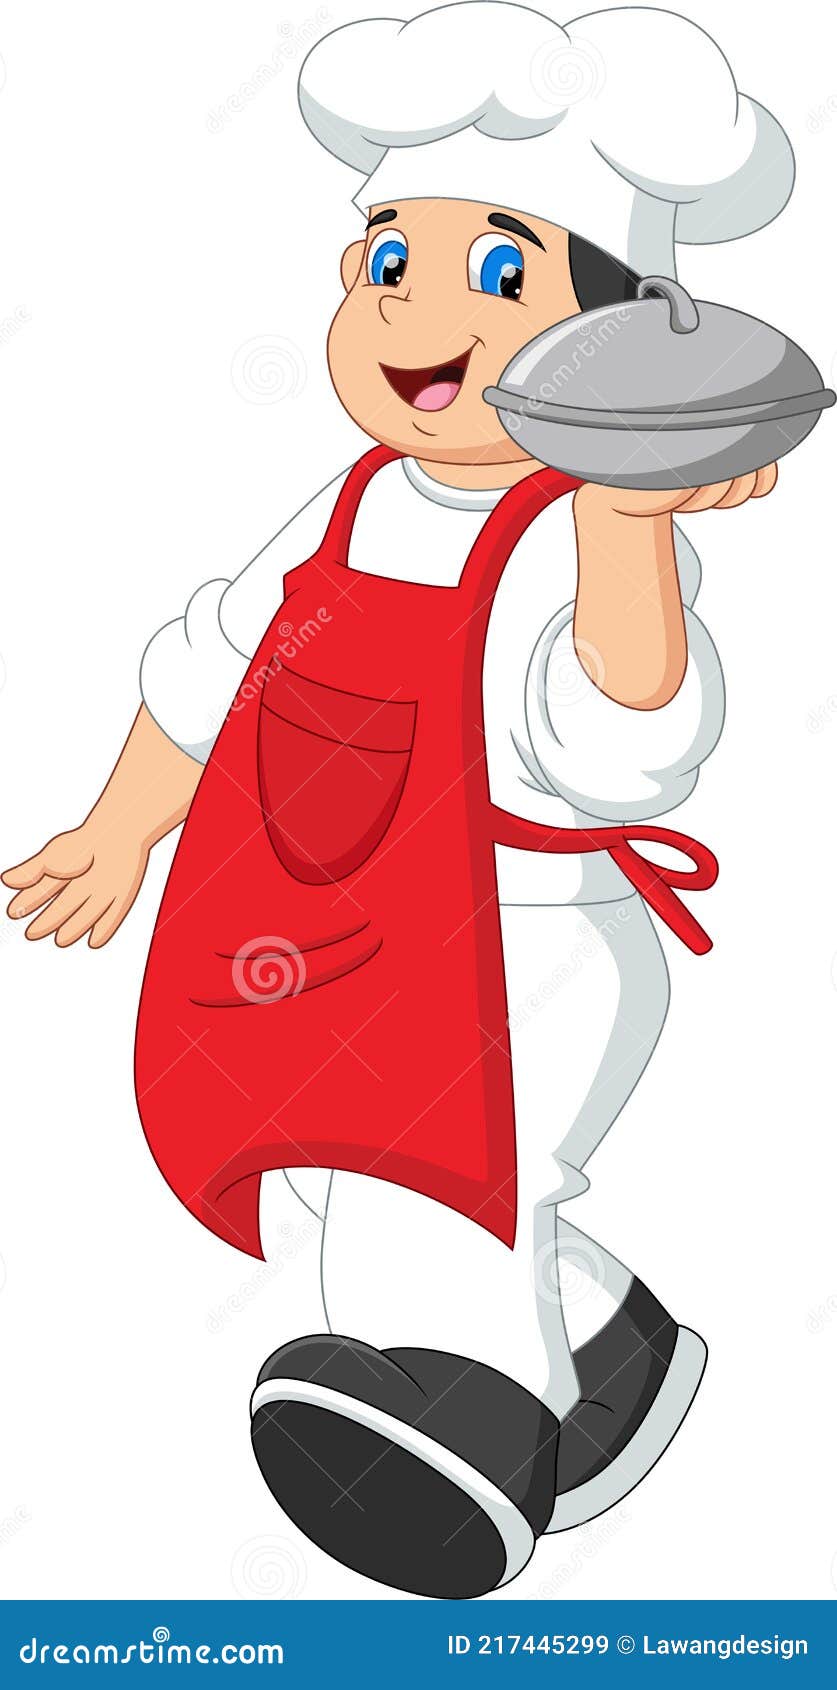 Chef bring a food tray stock vector. Illustration of beautiful - 217445299